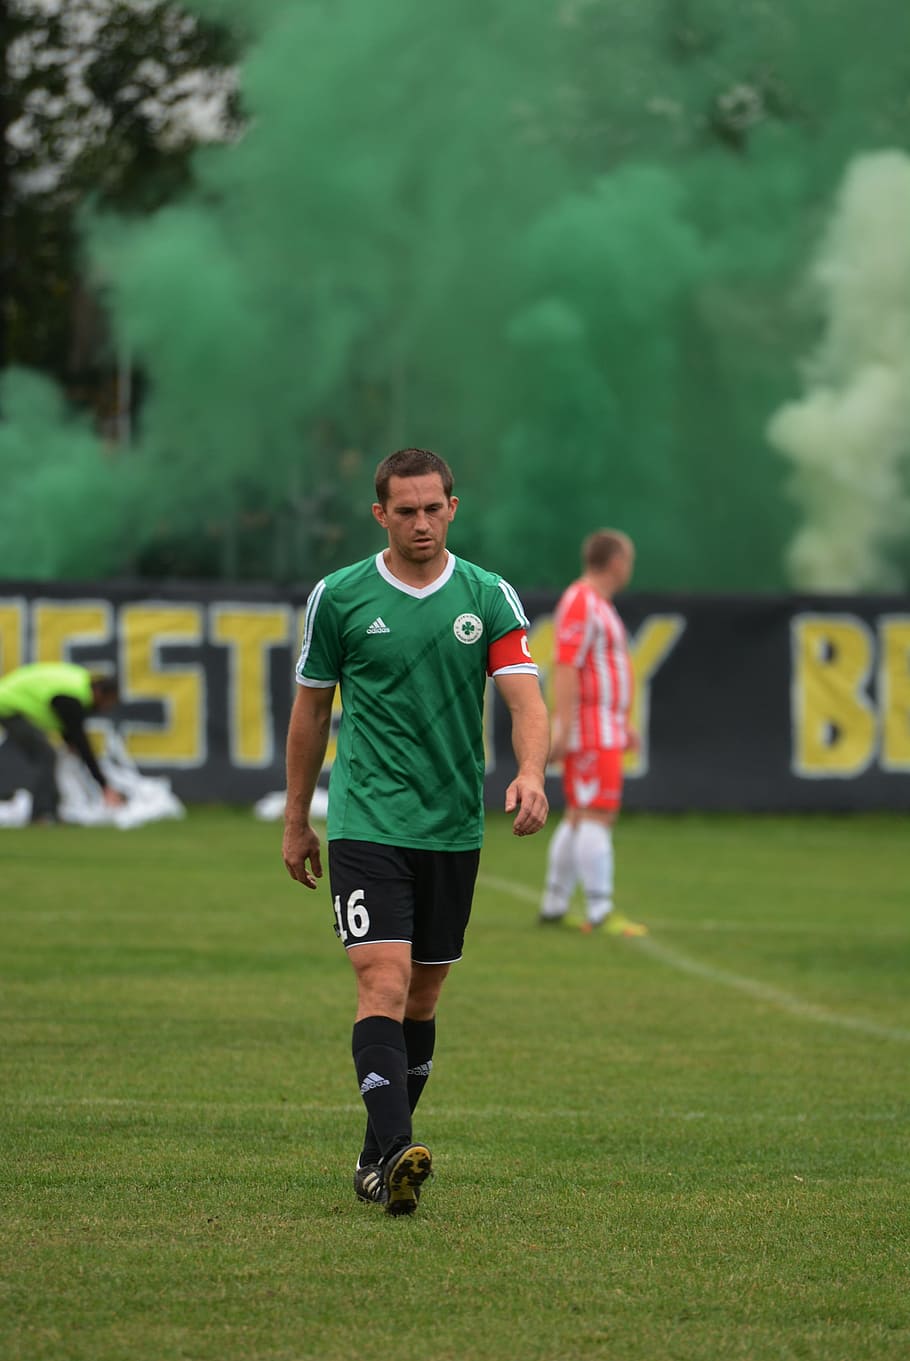 phot, king jakimiec, derby, sport, full length, grass, green color, sports clothing, athlete, focus on foreground